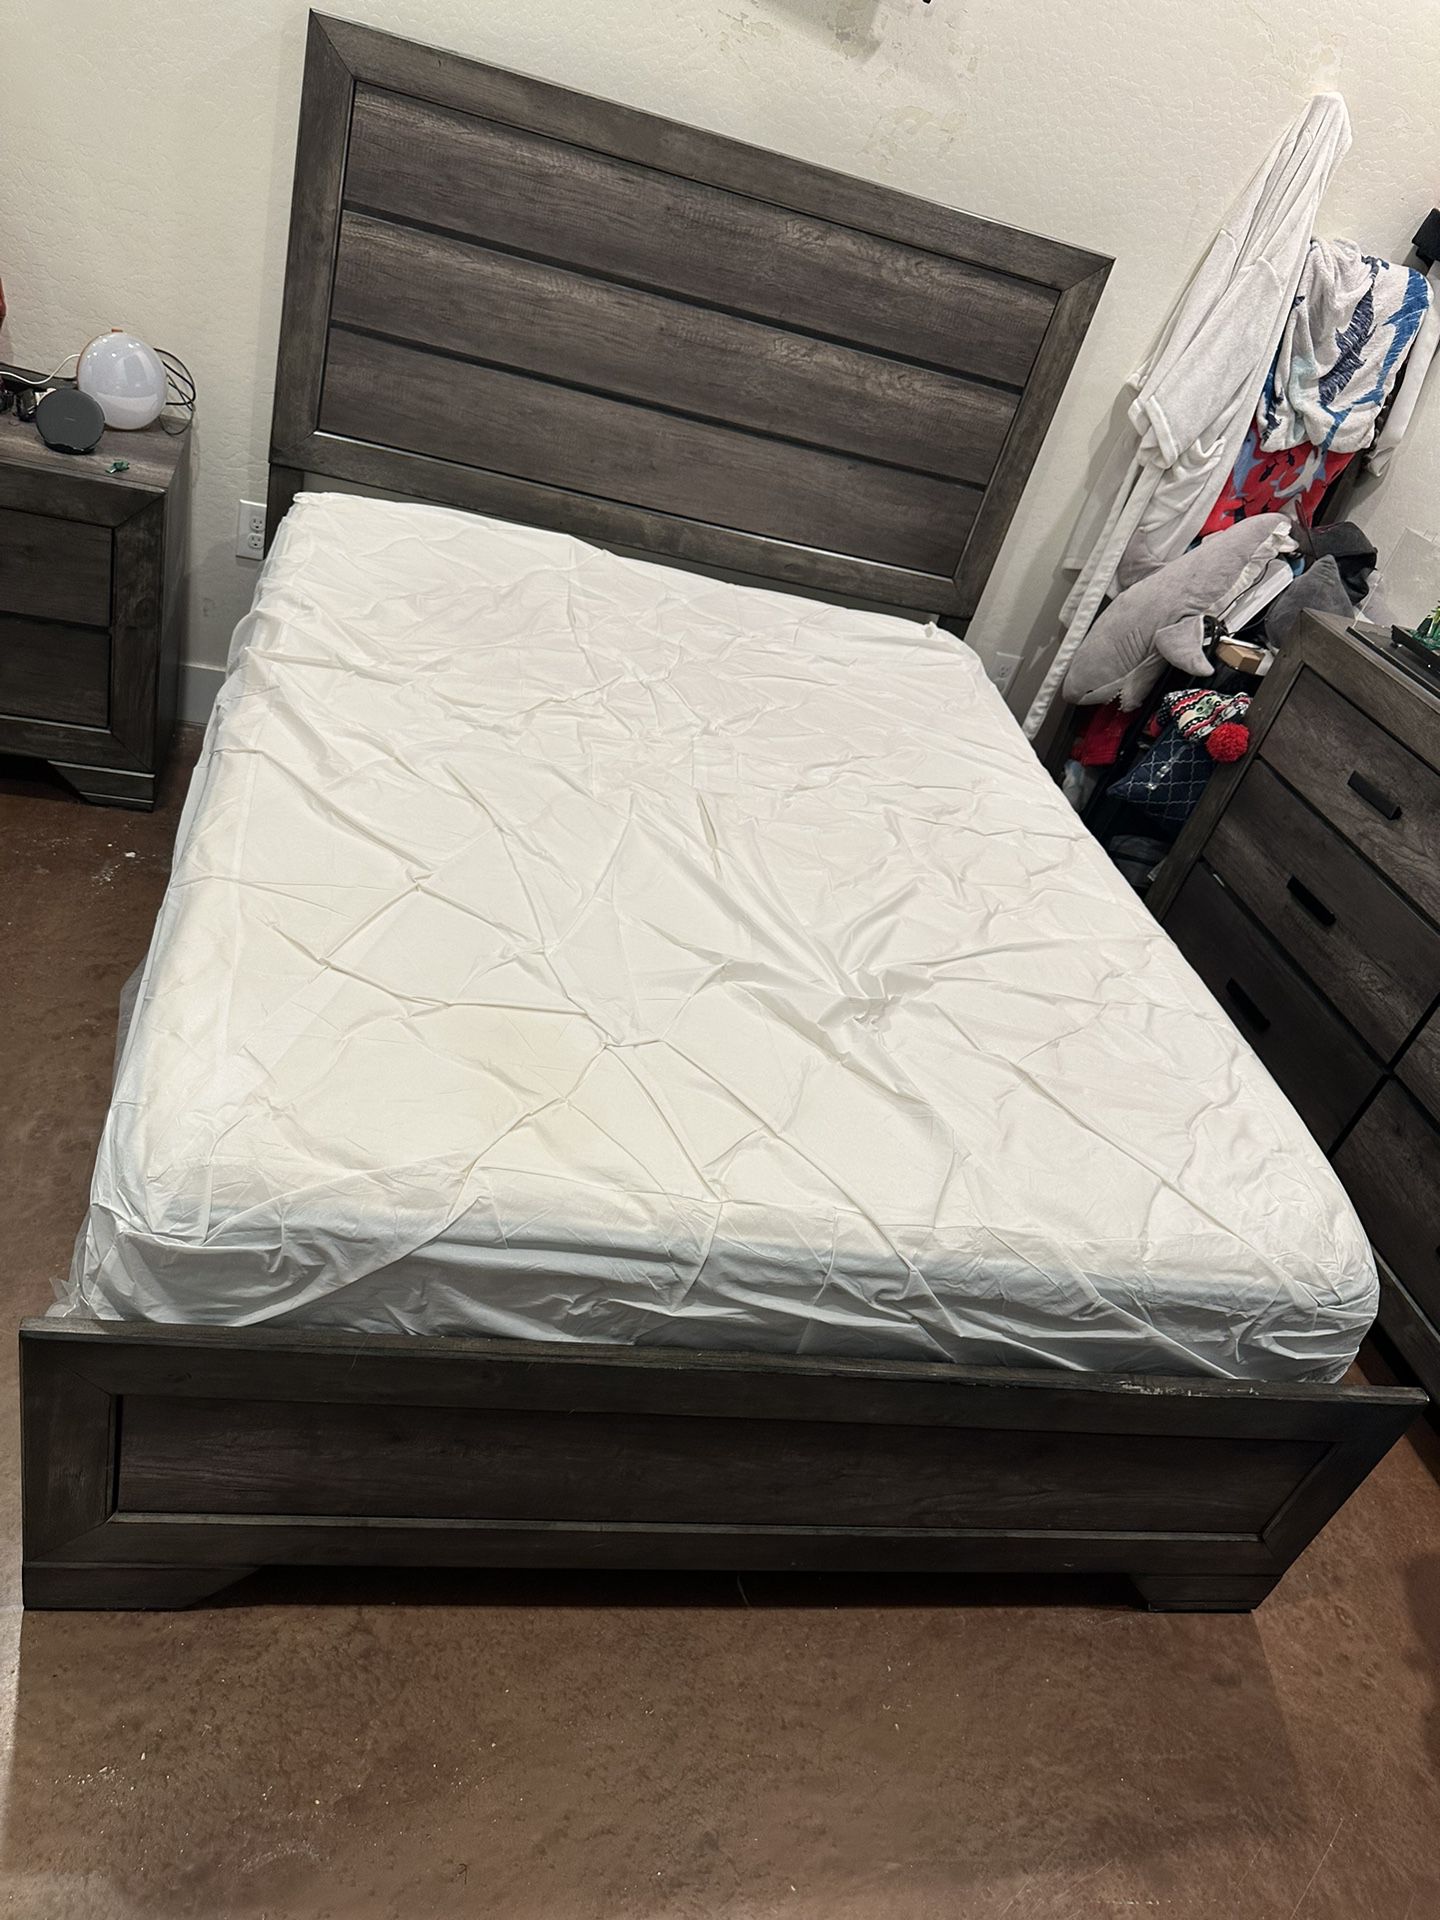 Queen Bed Frame - Mattress and Box Spring included